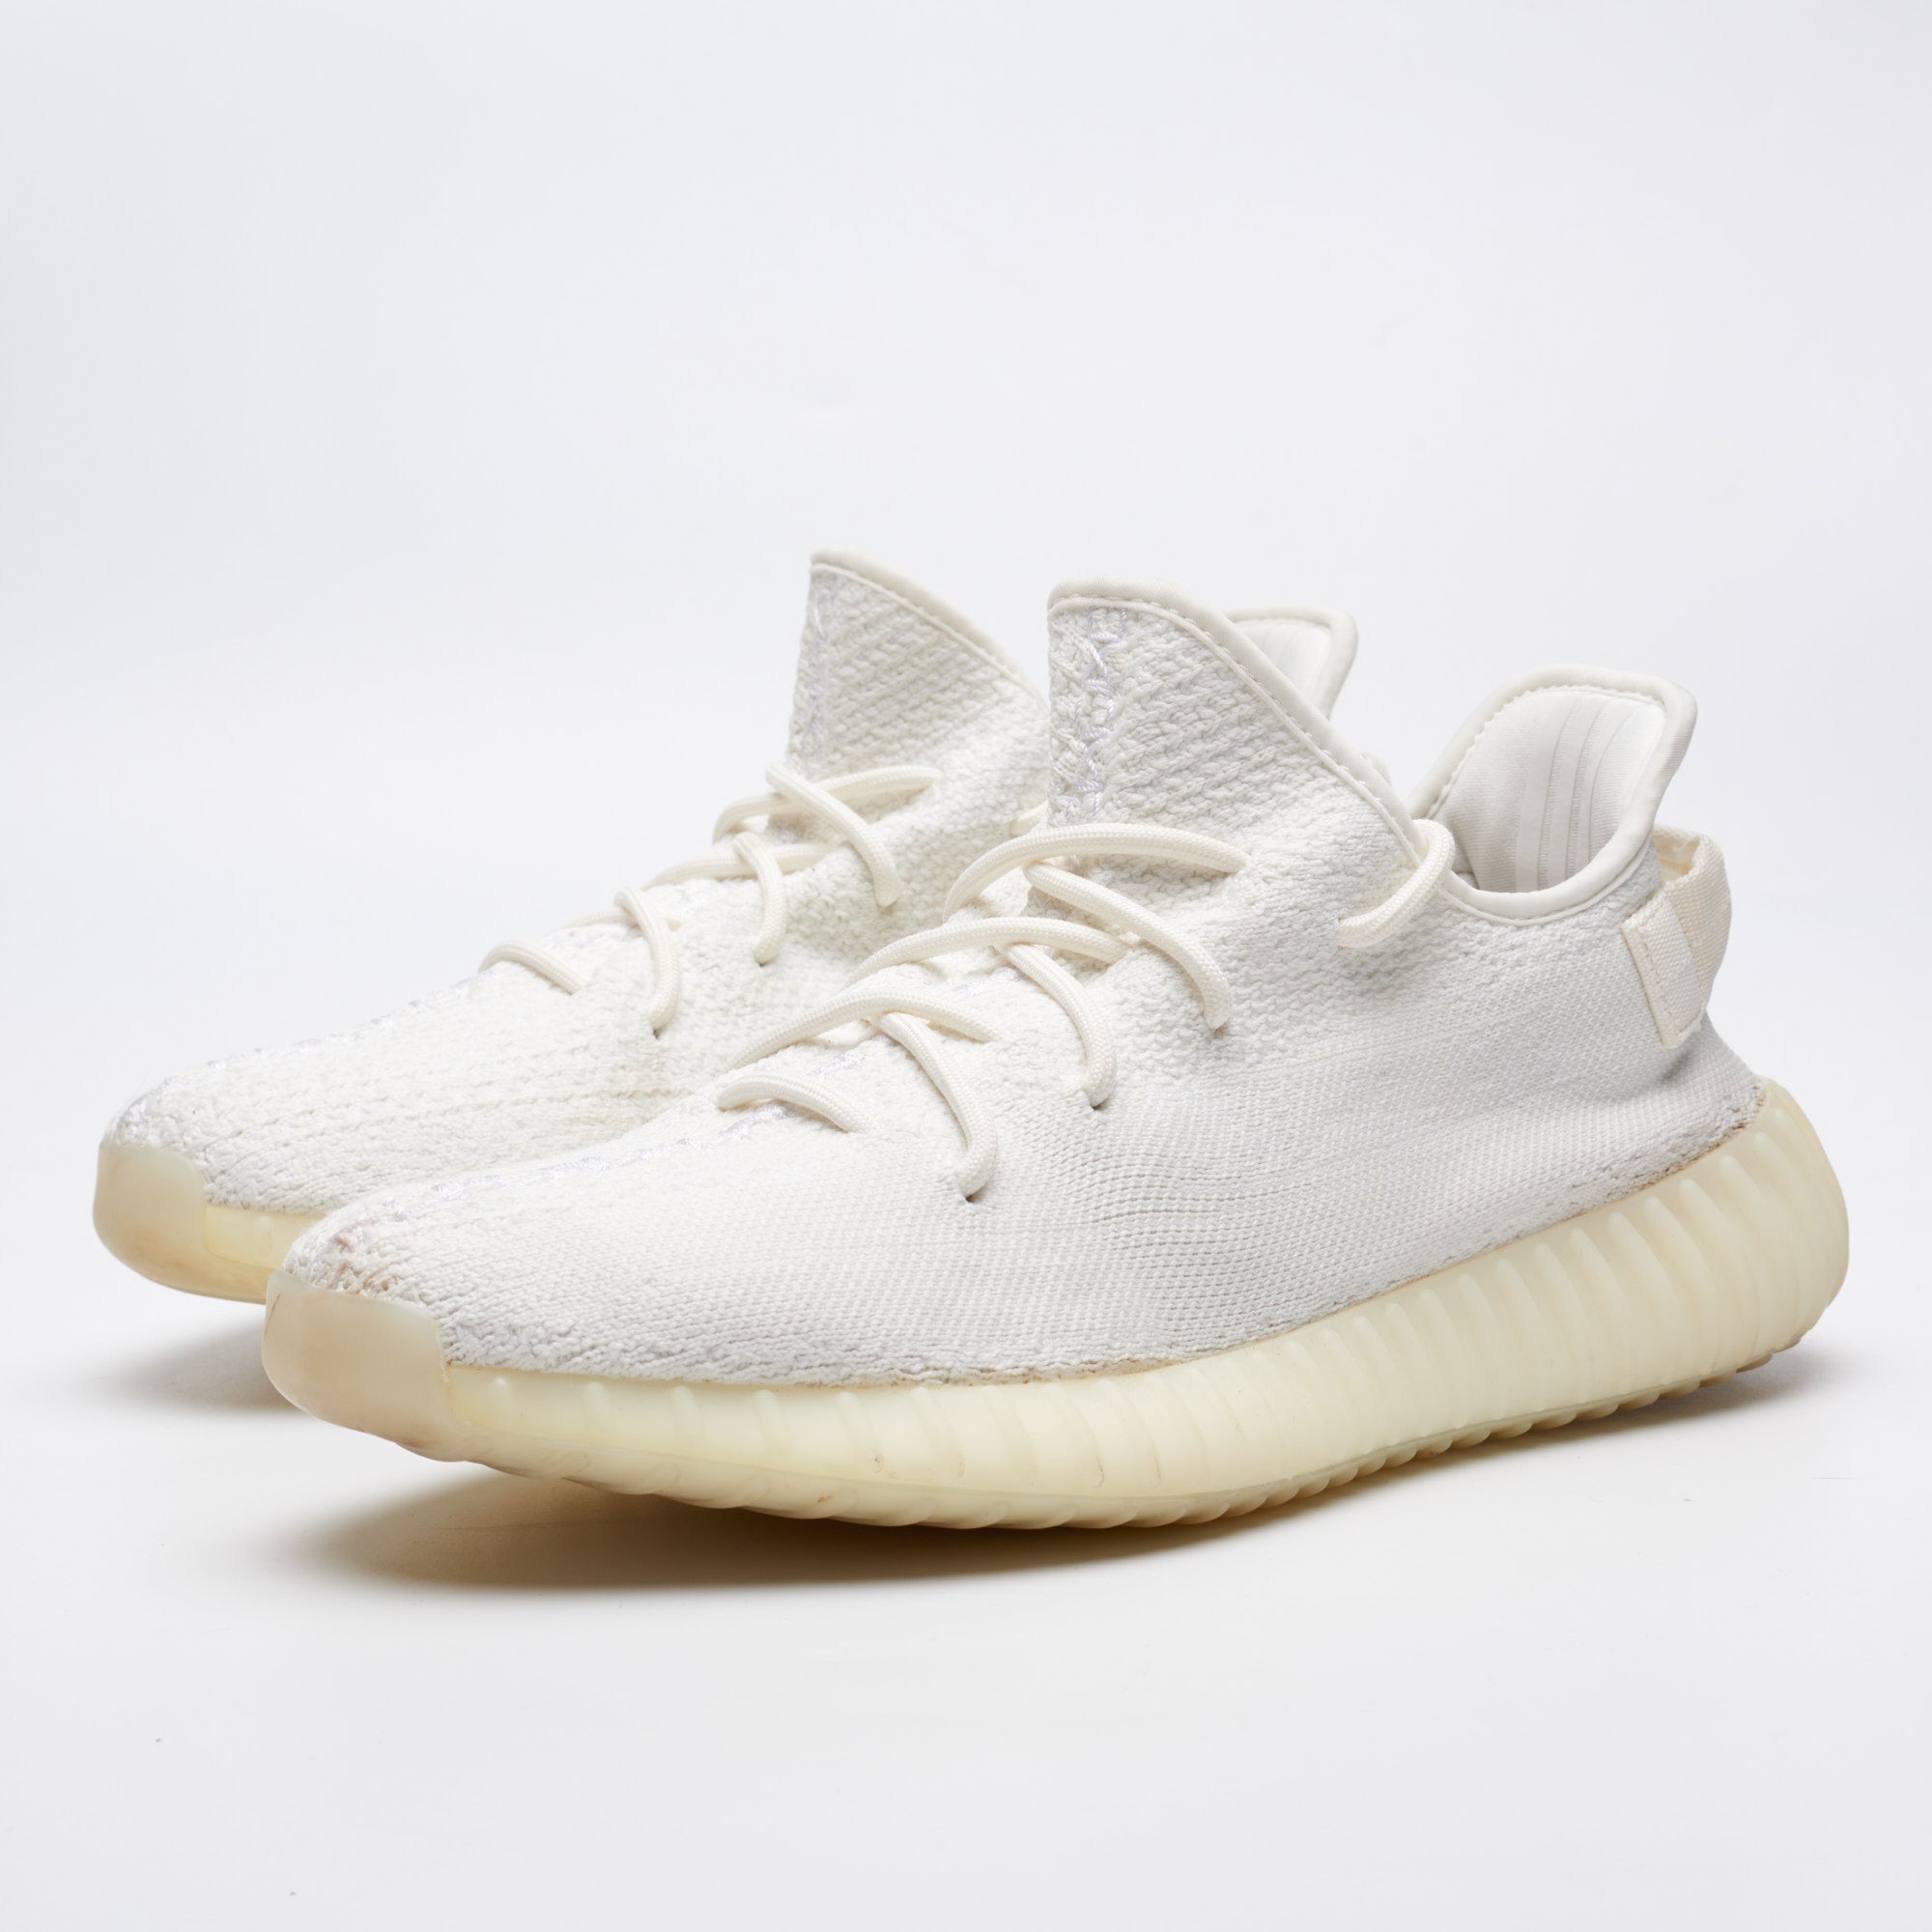 ADIDAS YEEZY BOOST 350 V2 Cream Triple White Sneakers Shoes UK 9.5 US